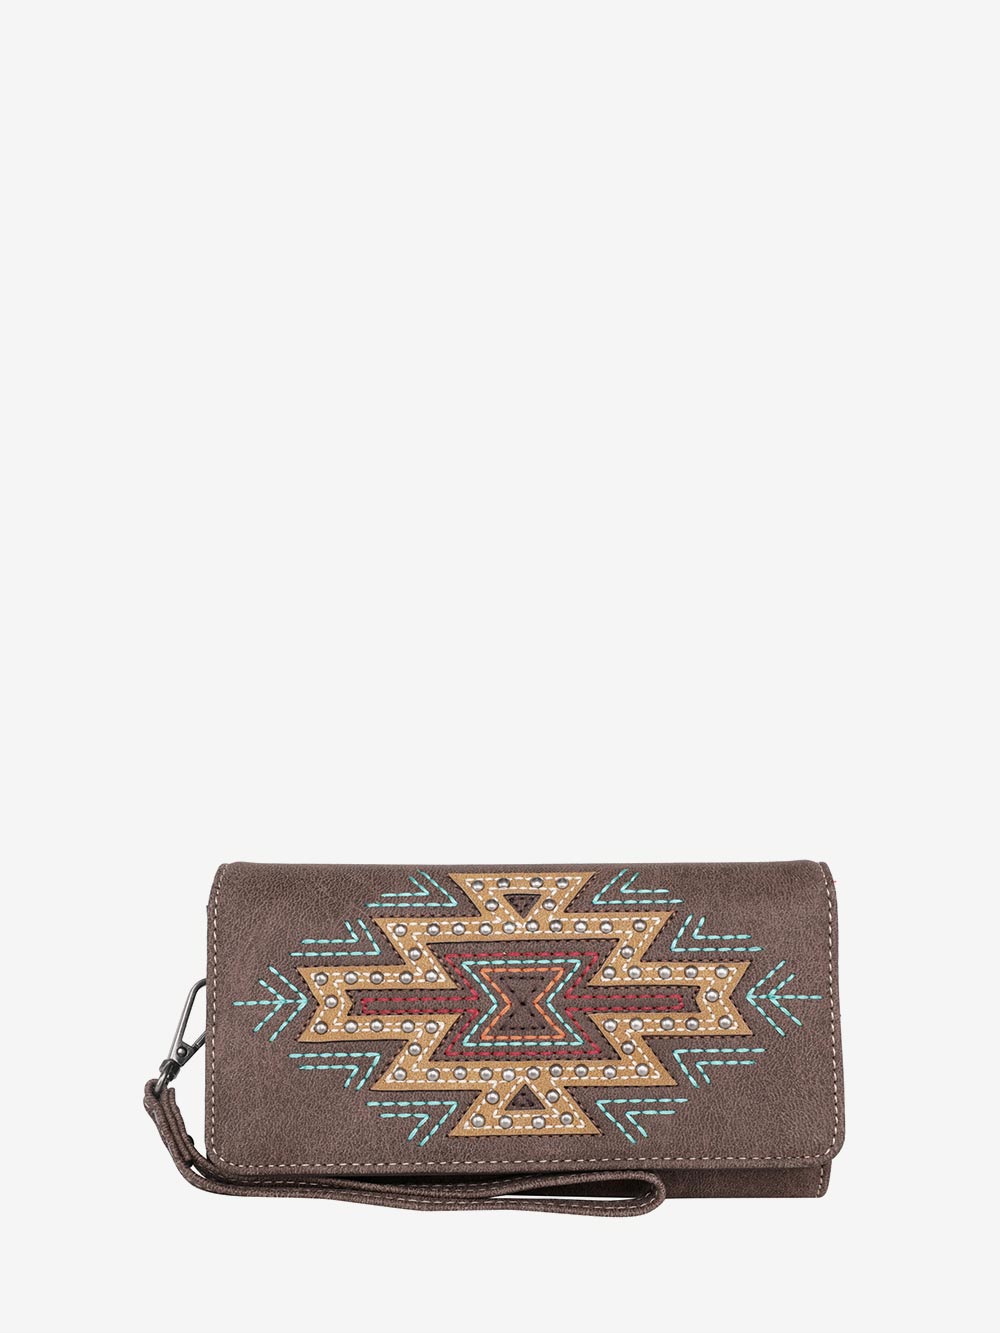 Montana West Cut-out Aztec Studs Concealed Carry Tote - Montana West World